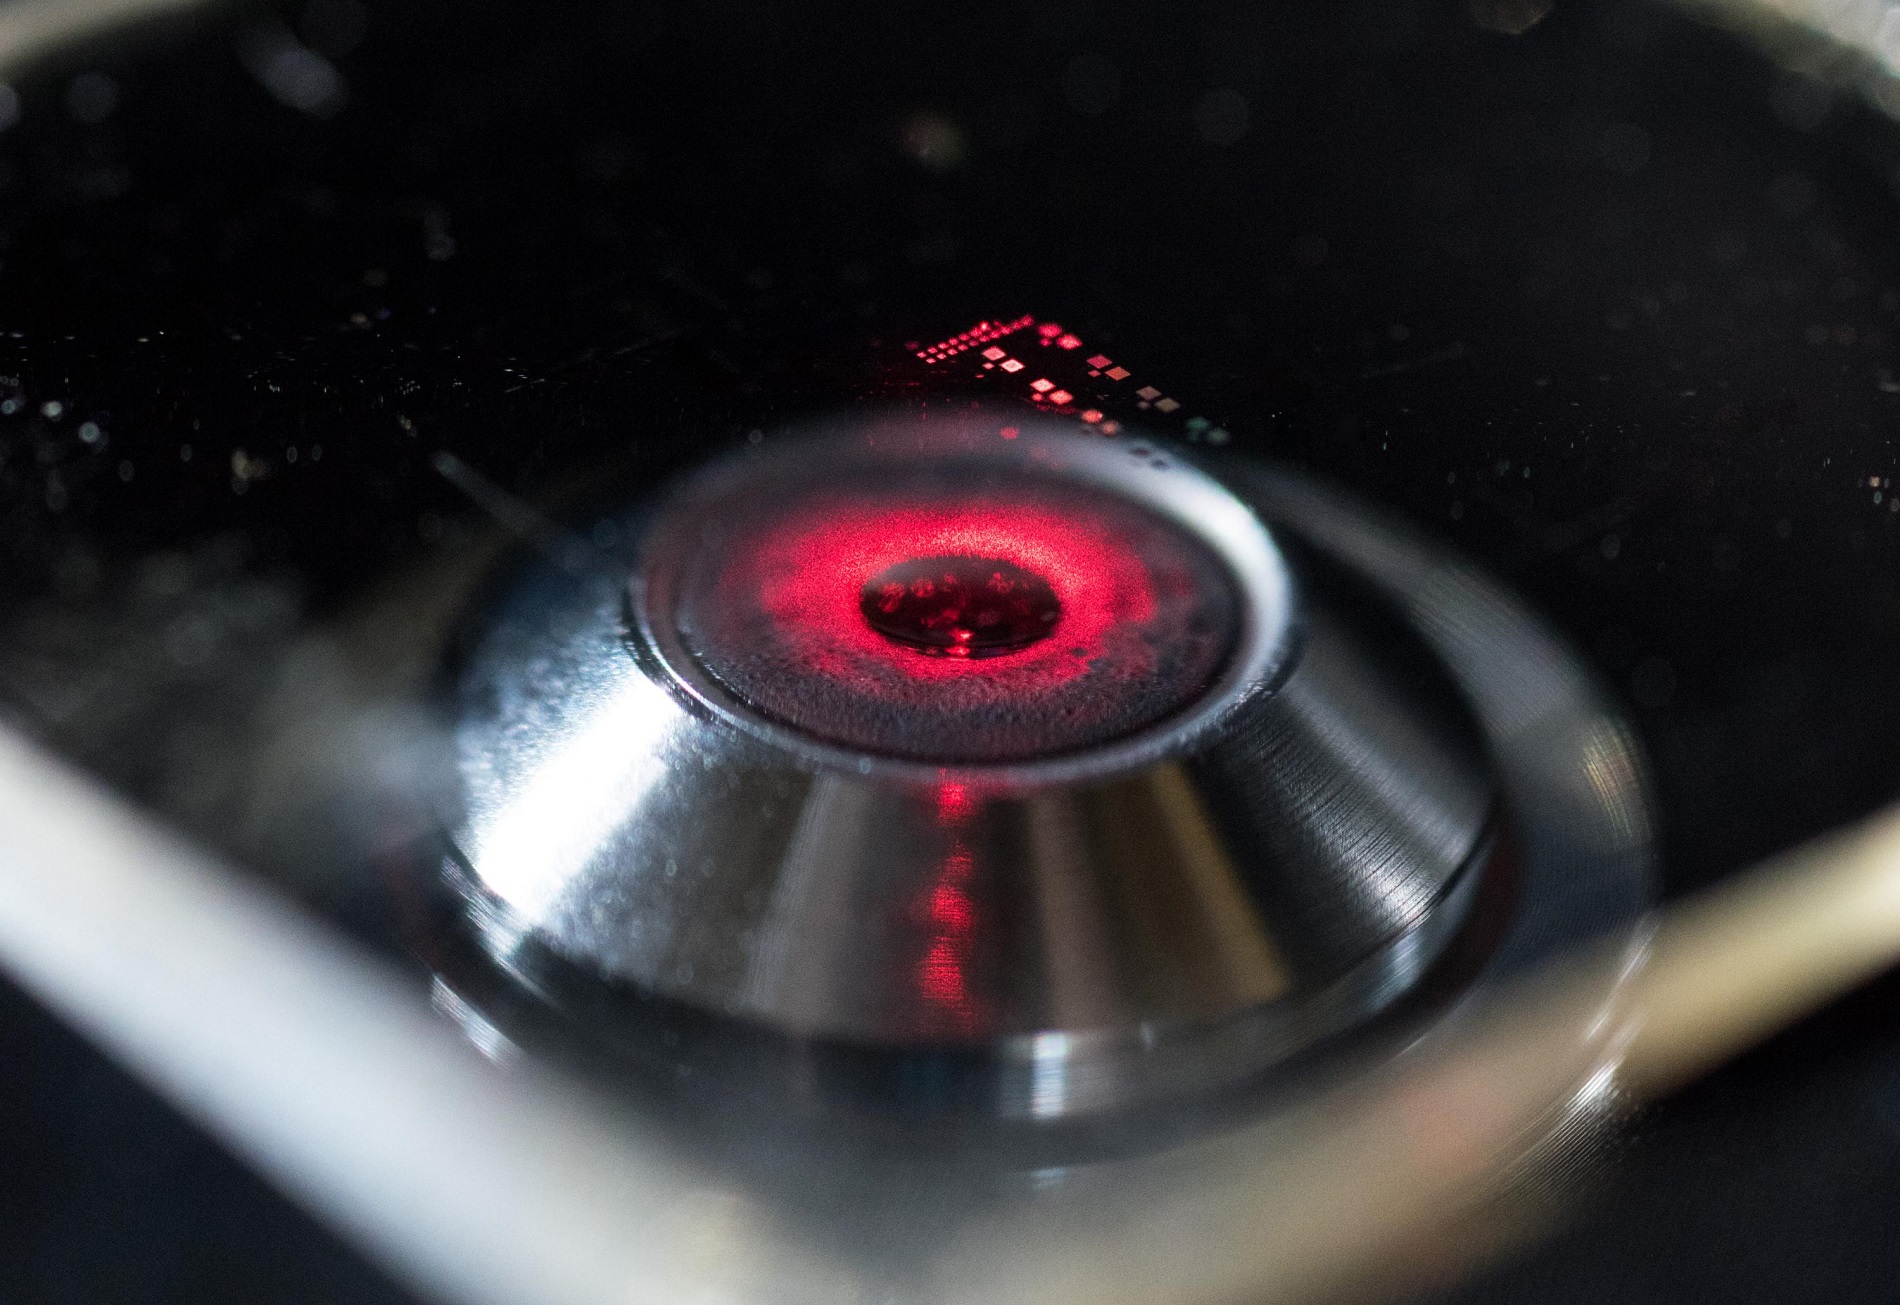 Laser light shows the nanopatterned structure of a chiral metamaterial developed by researchers in the School of Electrical and Computer Engineering at the Georgia Institute of Technology